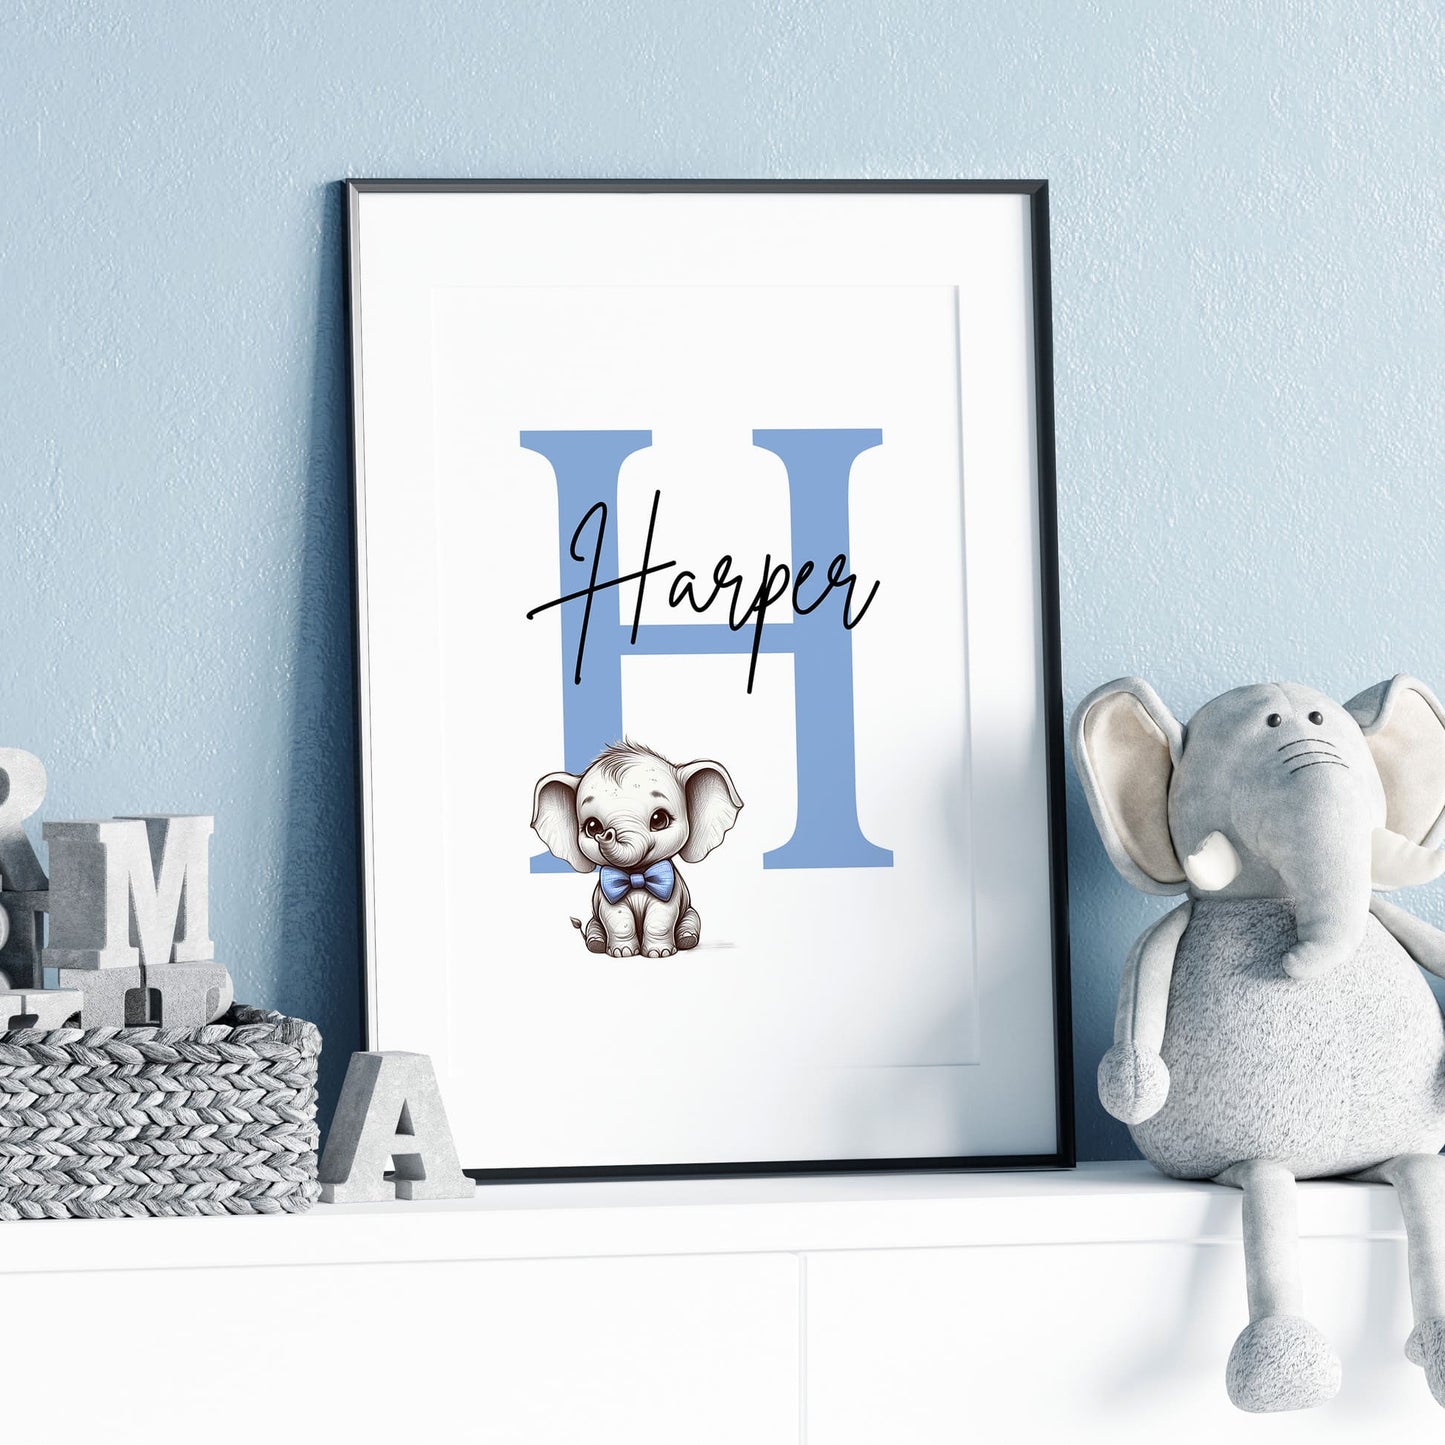 Set of three A4 prints in the style of pencil drawings. Each print features a cartoon baby giraffe, baby elephant, and baby zebra in black and white. They all wear a blue bow, with a few small blue hearts in the background. The middle image contains the elephant, which is smaller than the other two images. In the background, there is a large initial with a personalised name in black.